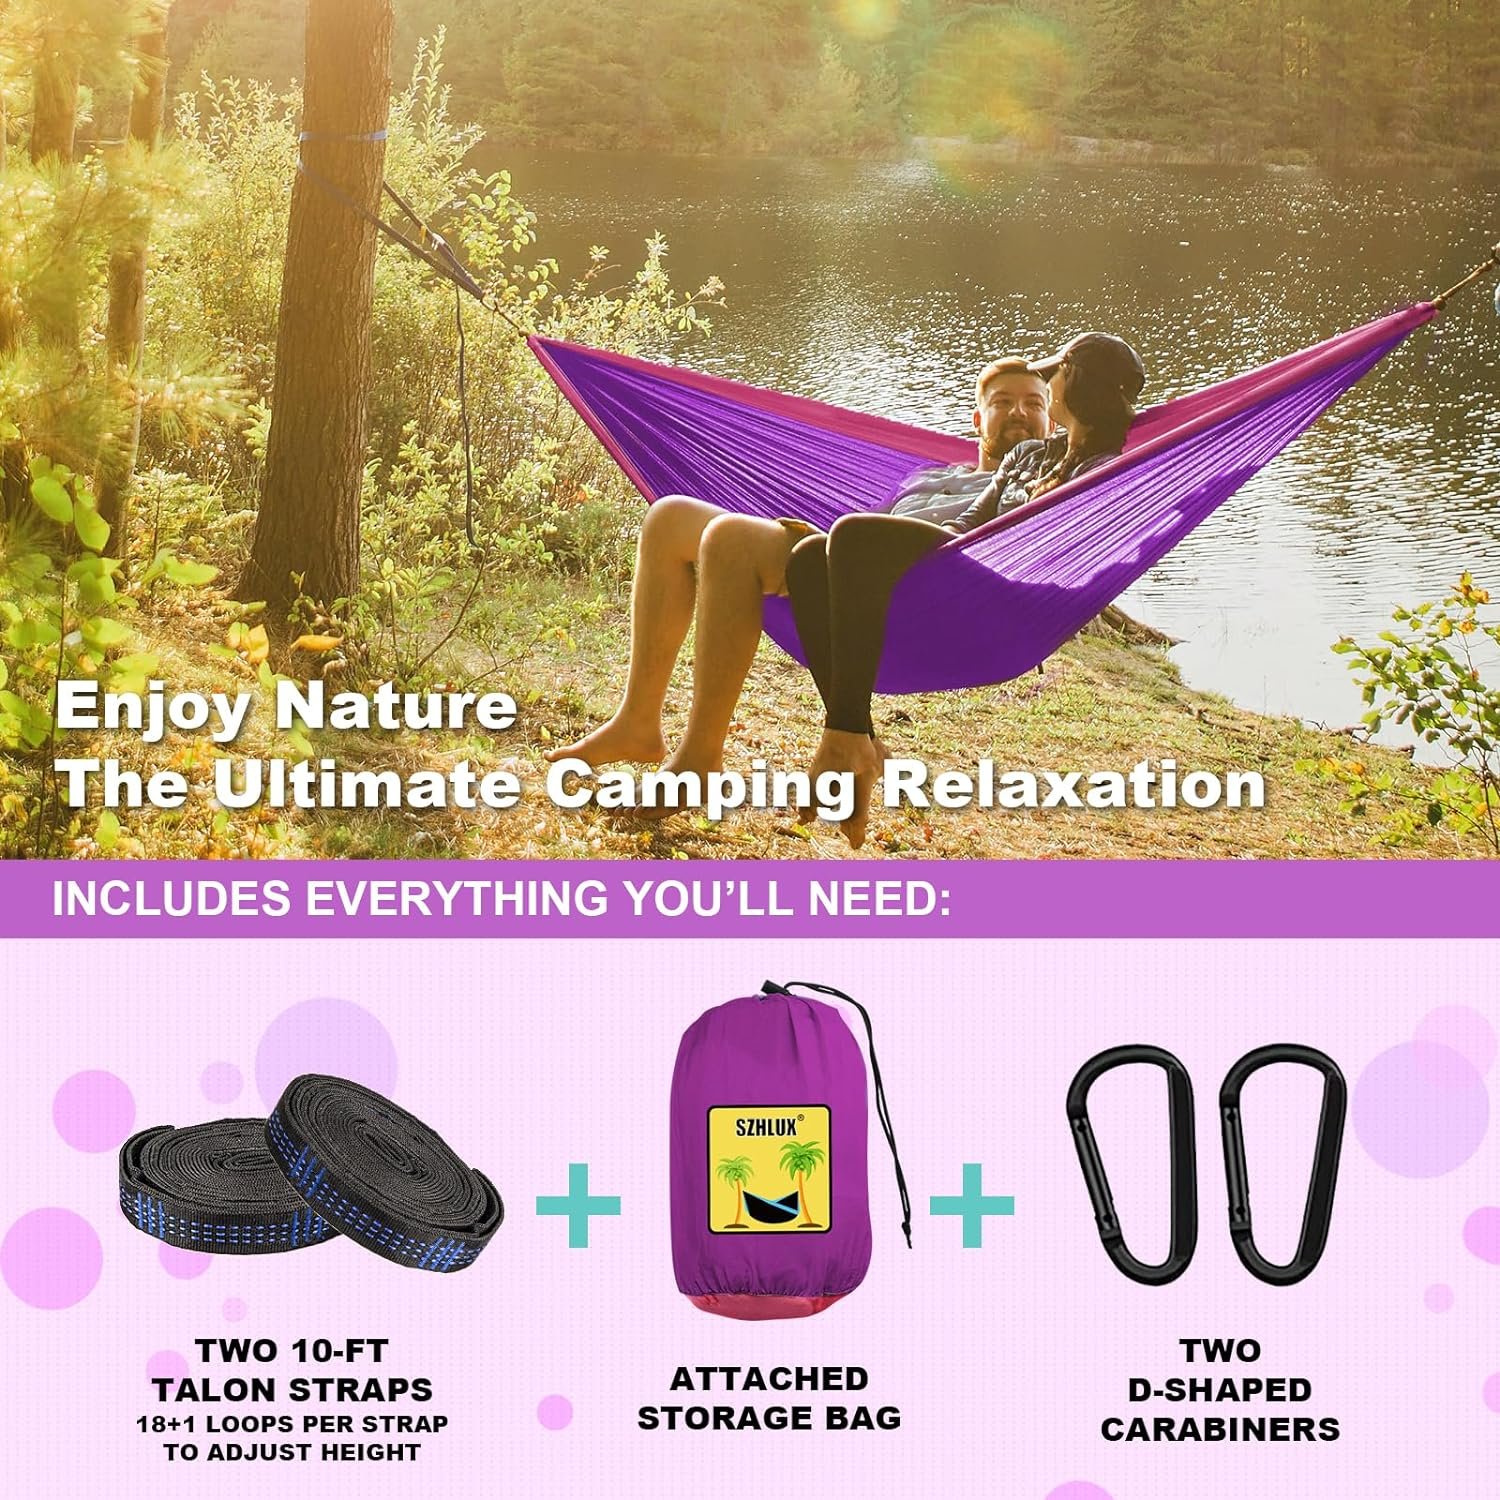 SZHLUX Camping Hammock Double Review